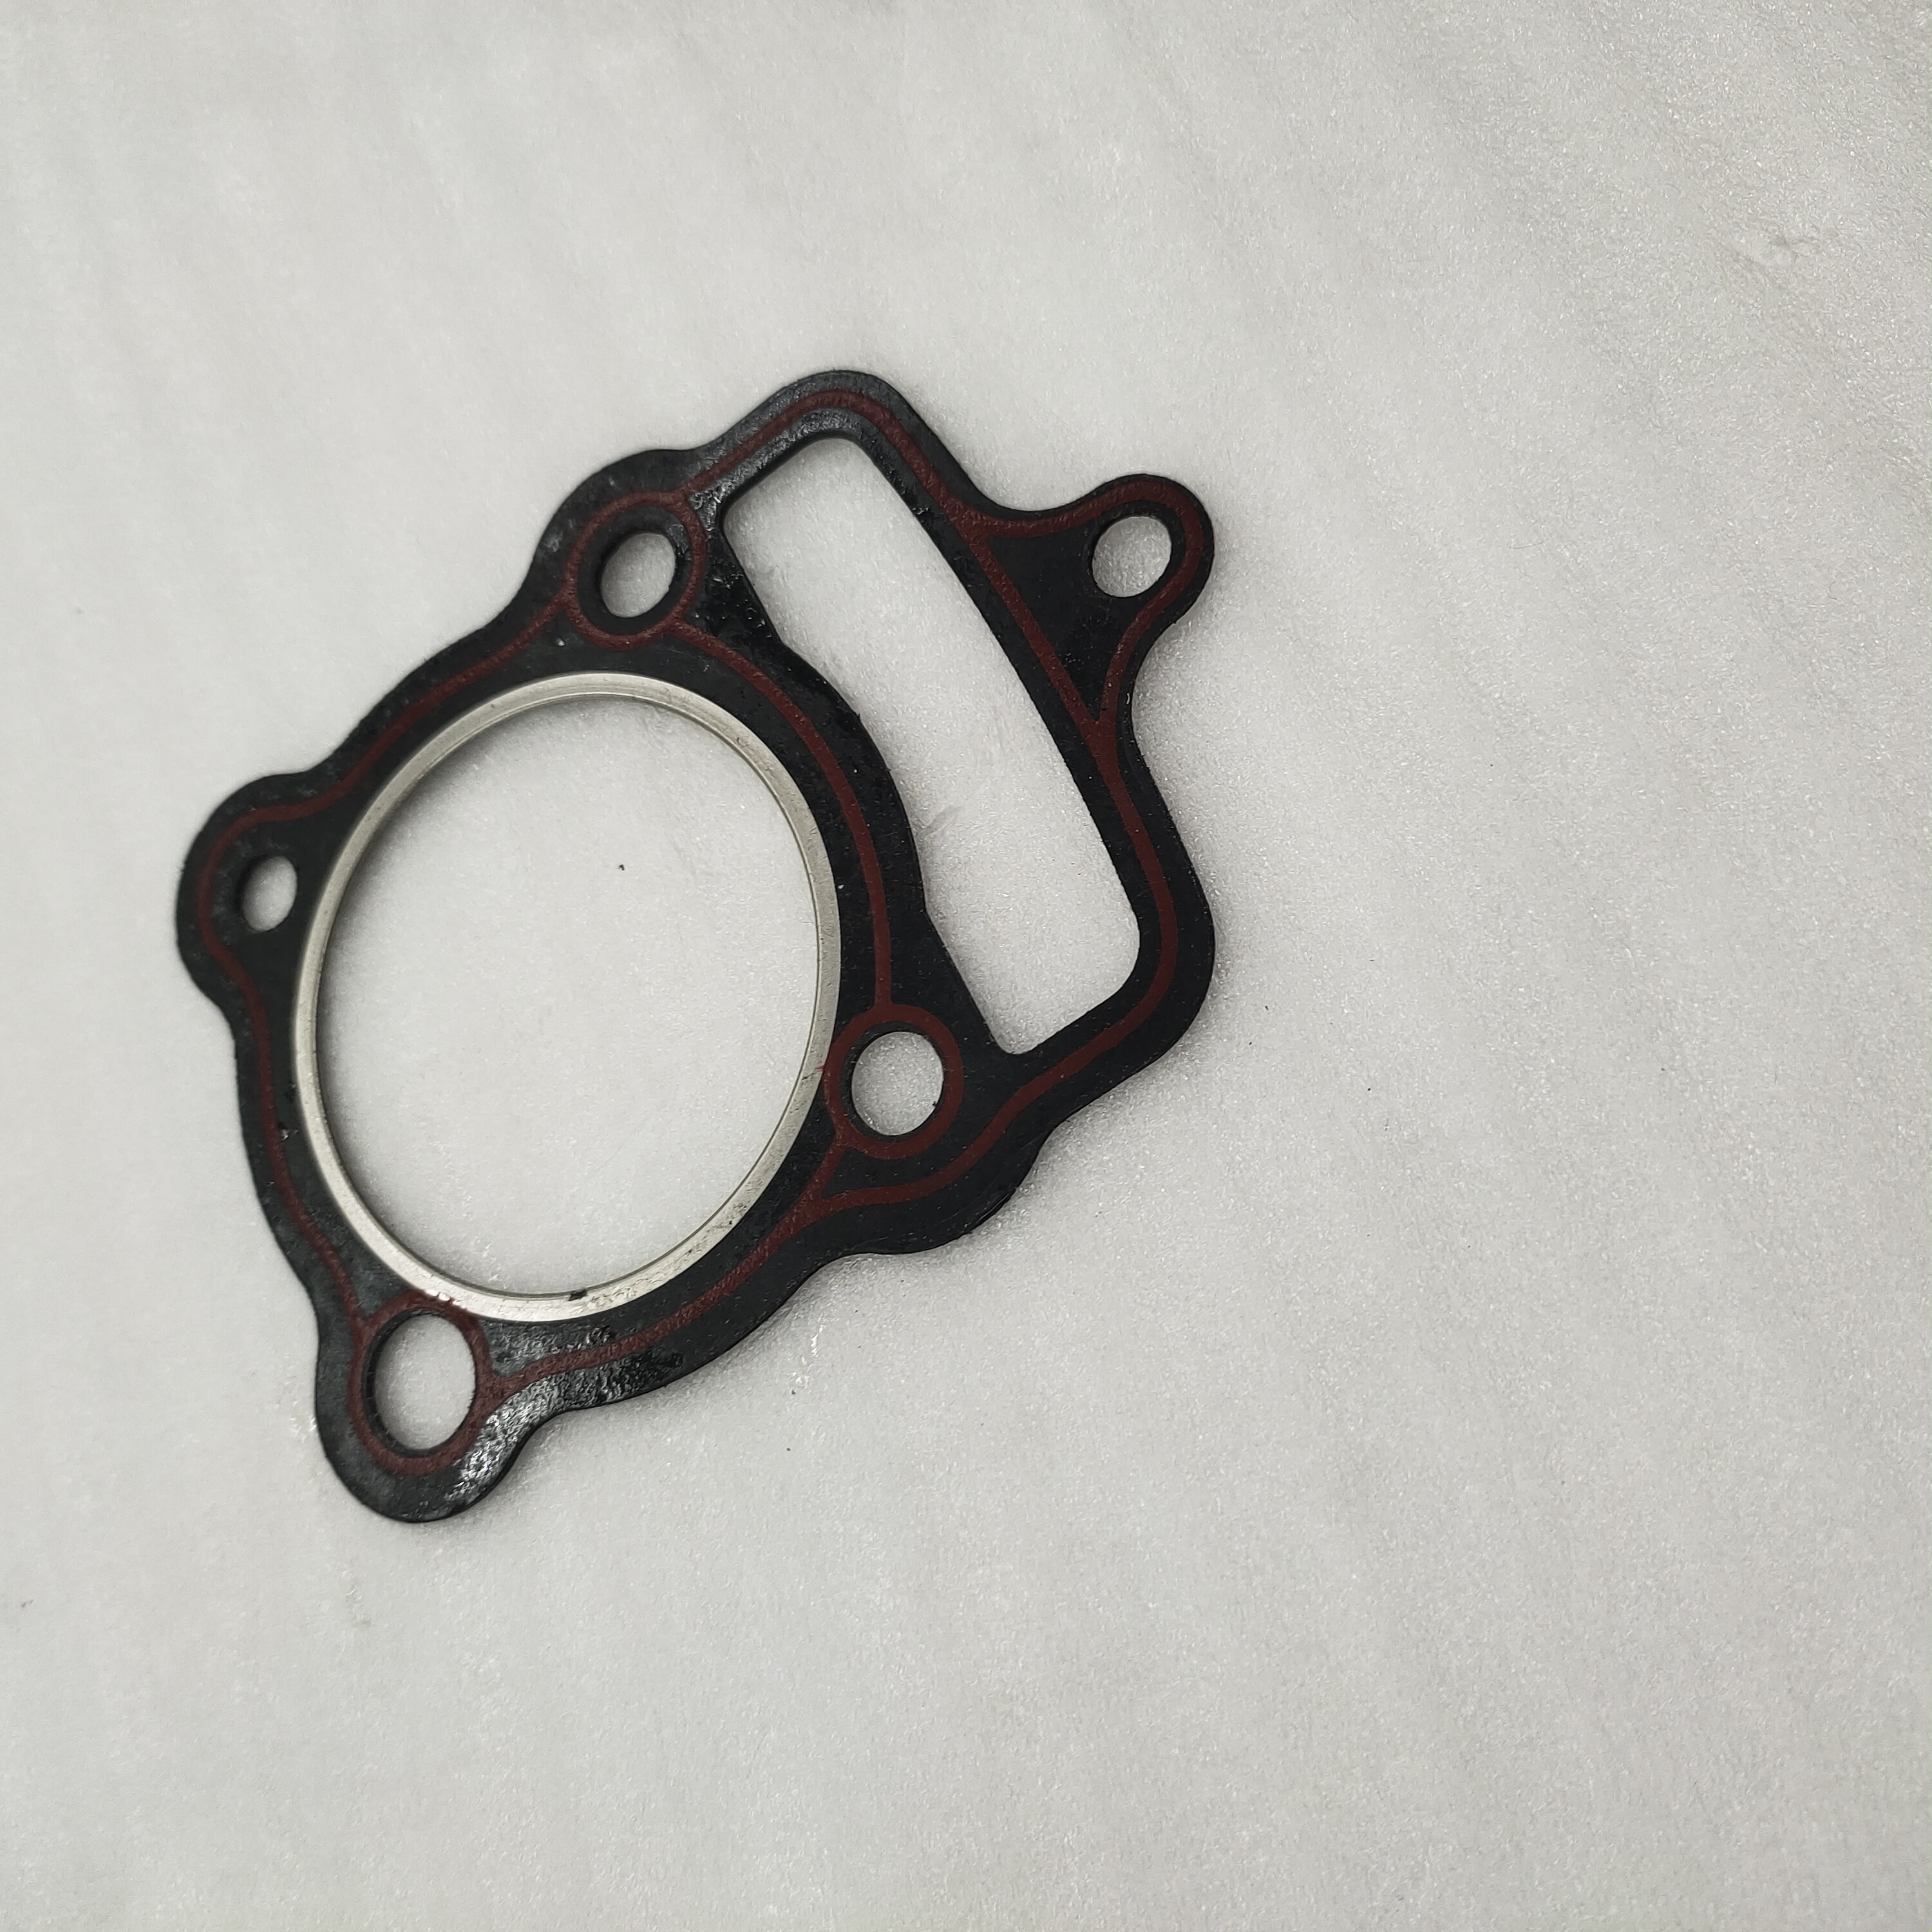 motorcycle LF150cc 250cc engine parts  cylinder head gasket paper gland high precison for tricycle engine parts high quality